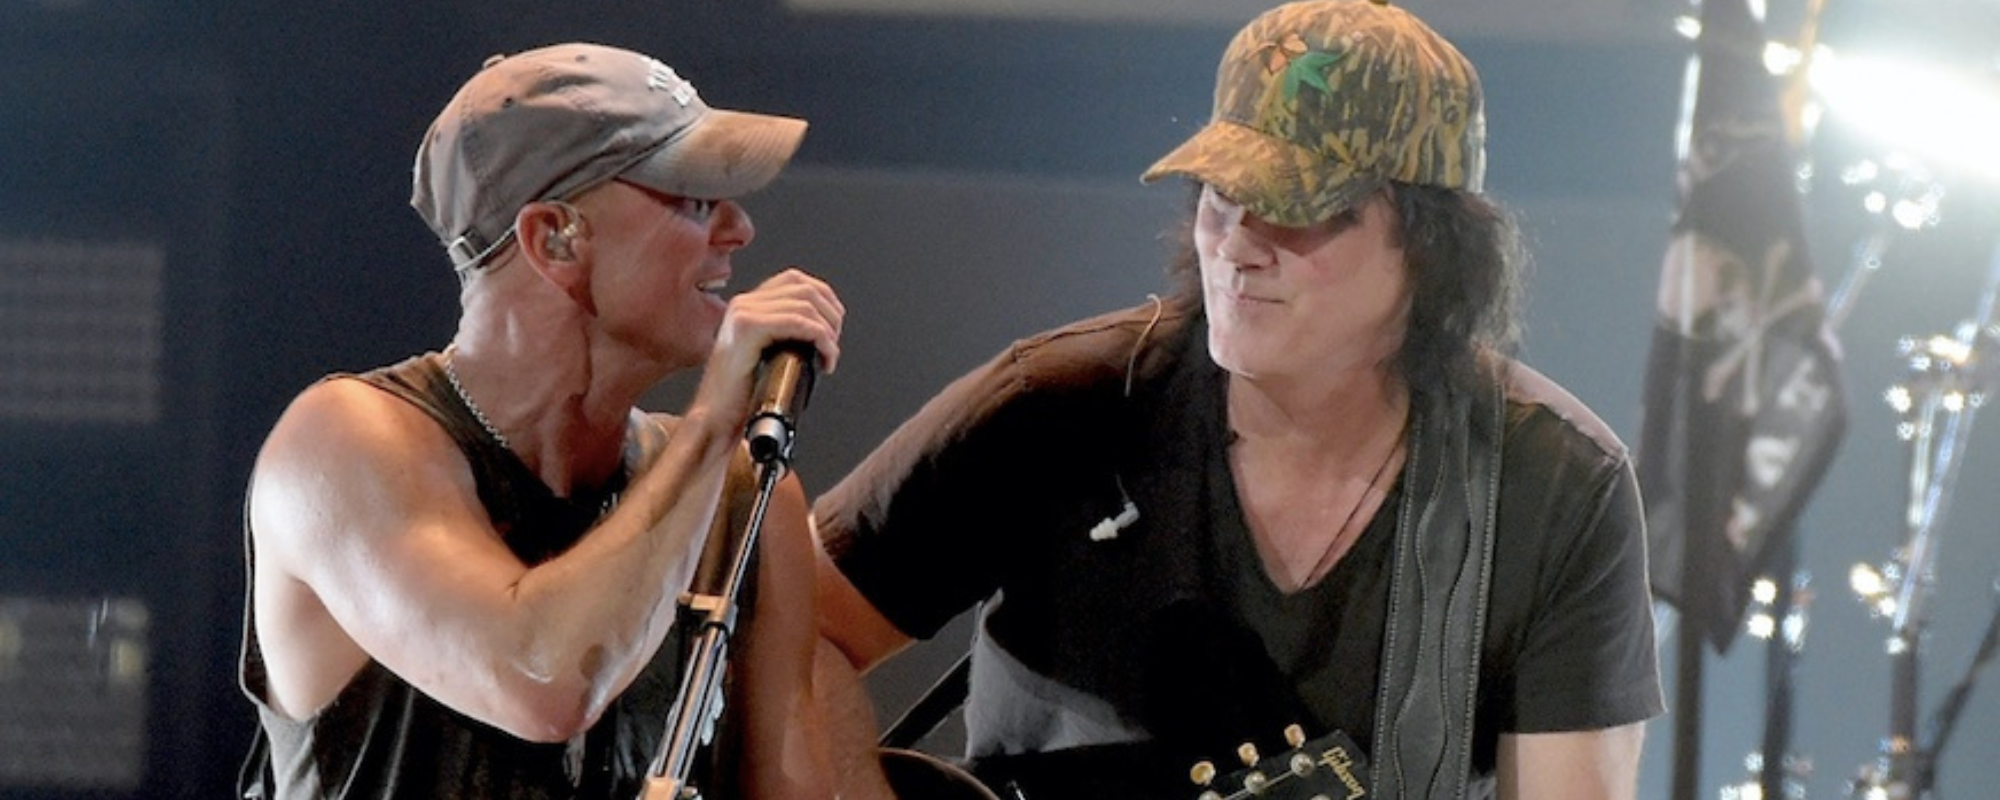 The Meaning Behind David Lee Murphy’s “Everything’s Gonna Be Alright” & Working with Kenny Chesney